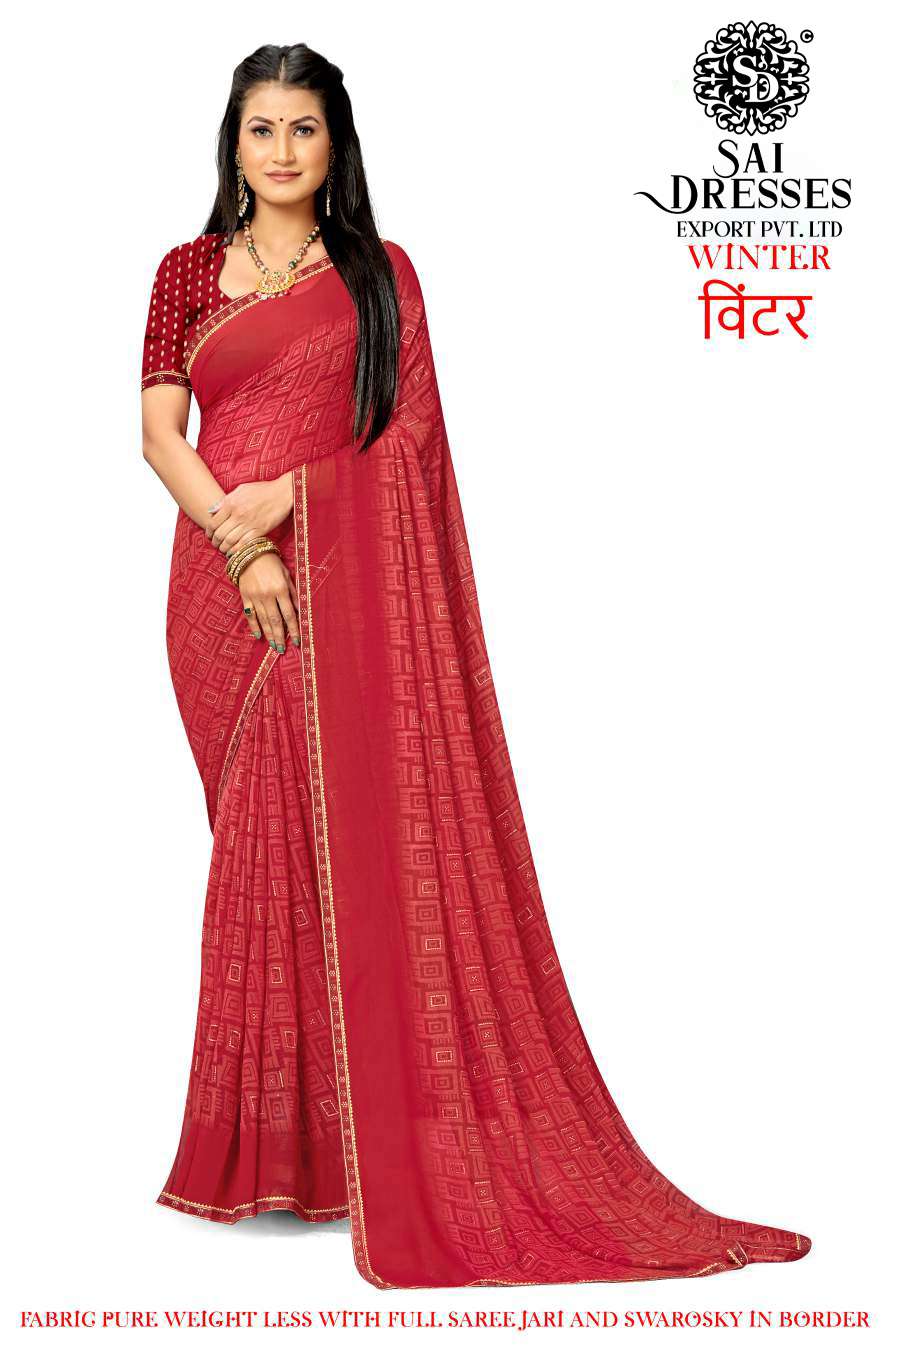 SAI DRESSES PRESENT WINTER DAILY WEAR PURE WEIGTH LESS SAREE IN WHOLESALE RATE IN SURAT